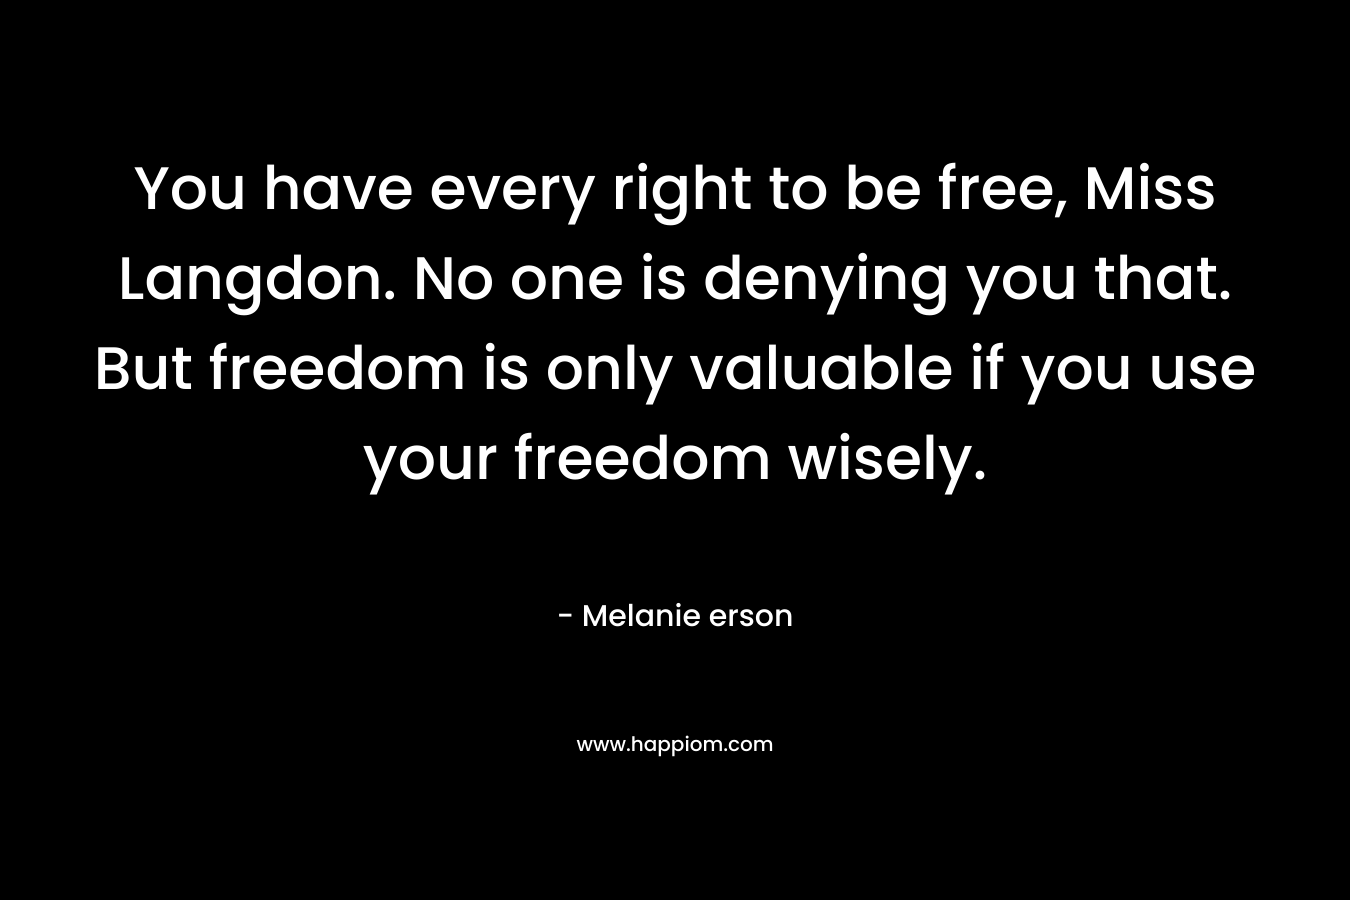 You have every right to be free, Miss Langdon. No one is denying you that. But freedom is only valuable if you use your freedom wisely.